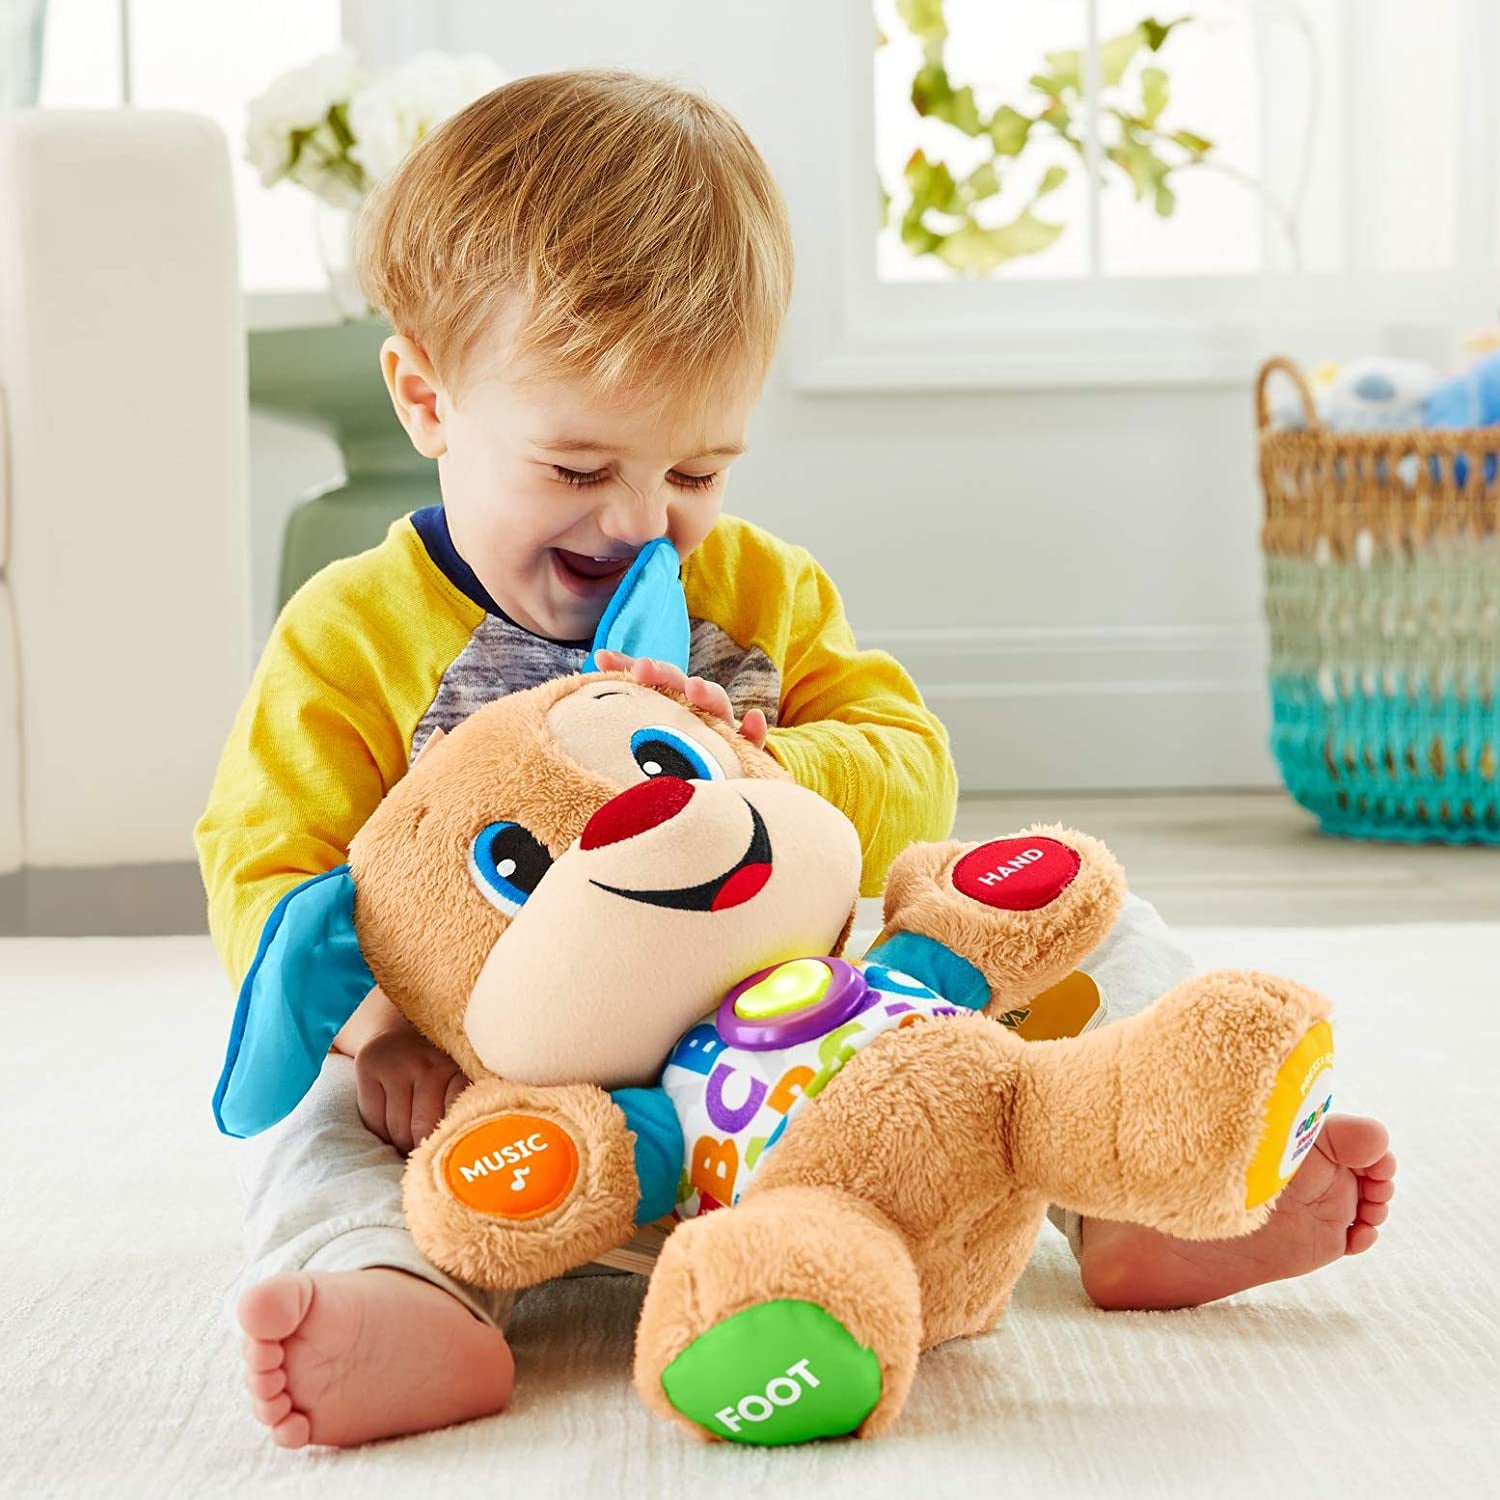 Fisher-Price Laugh & Learn Baby & Toddler Toy Smart Stages Puppy Interactive Plush Dog